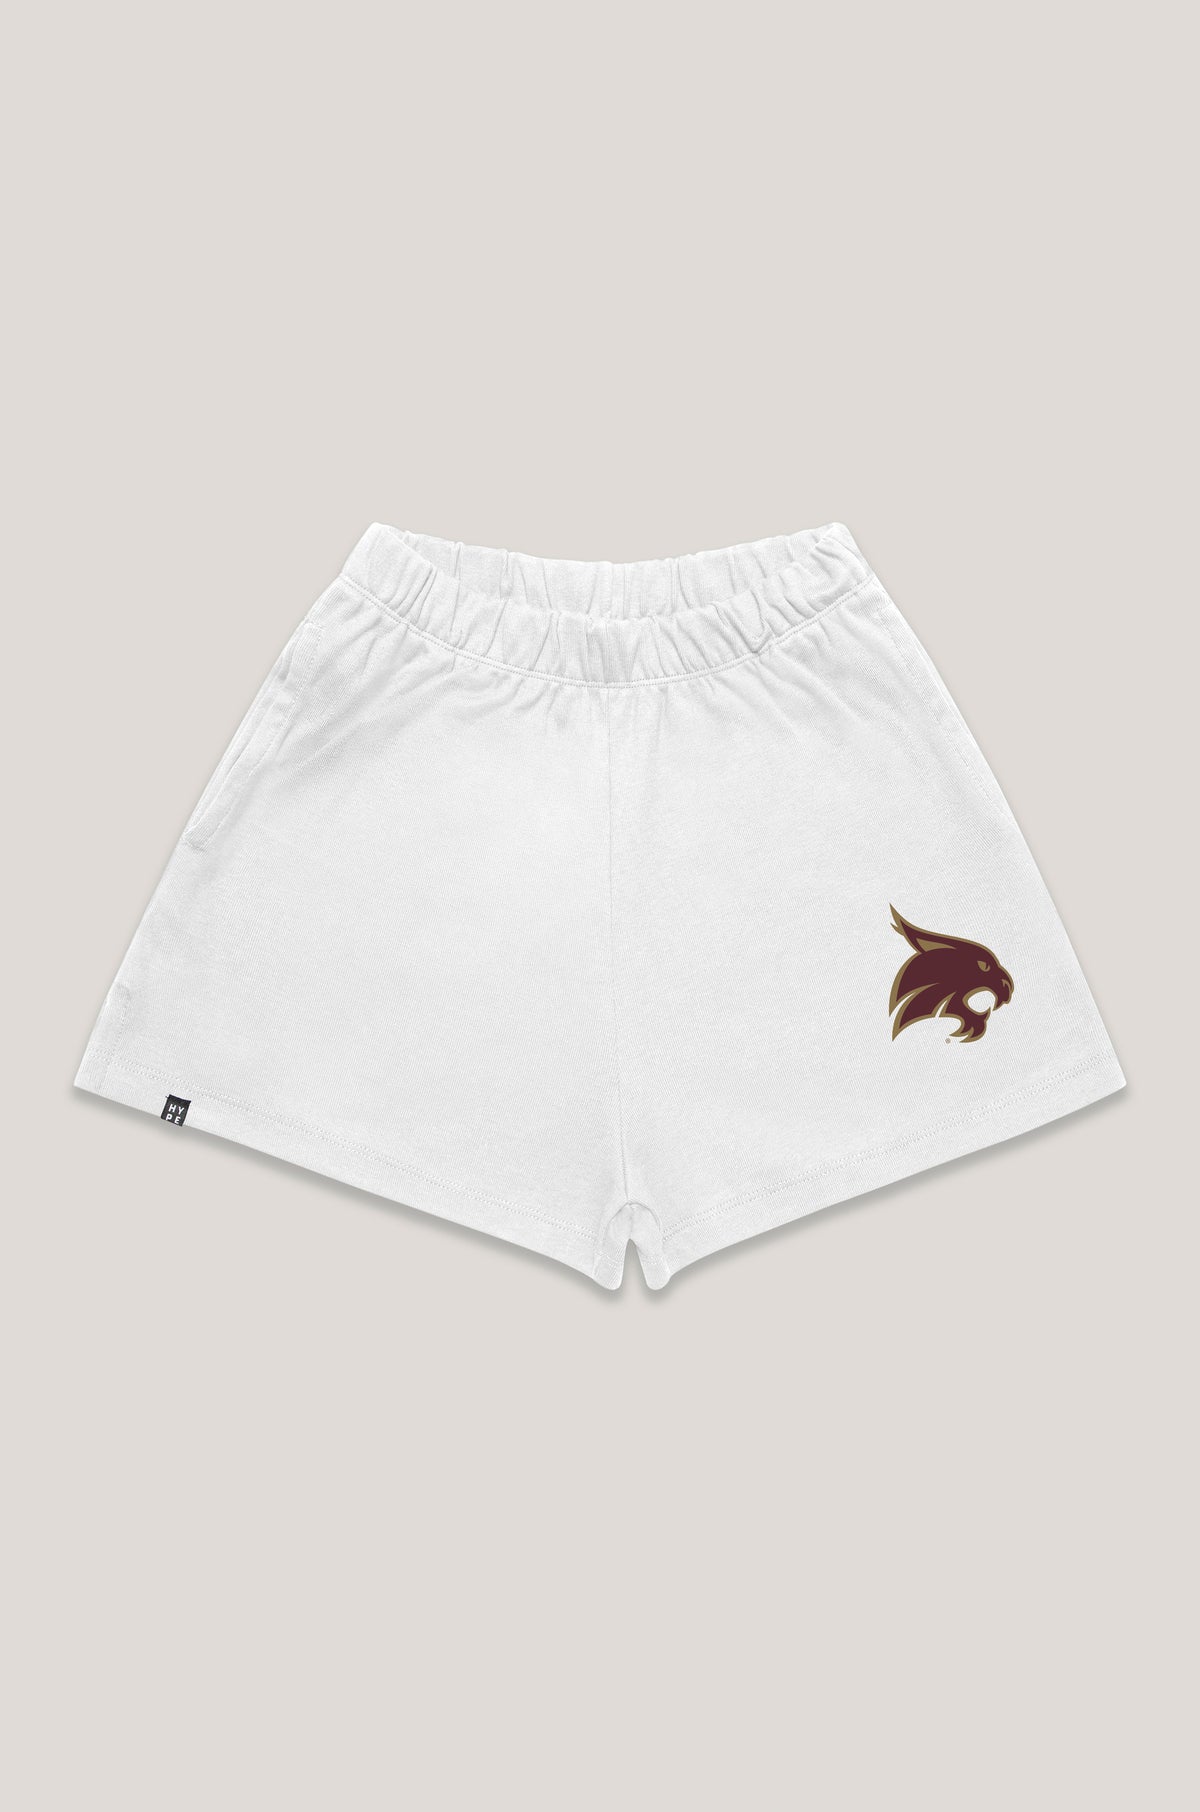 Texas State Track Shorts